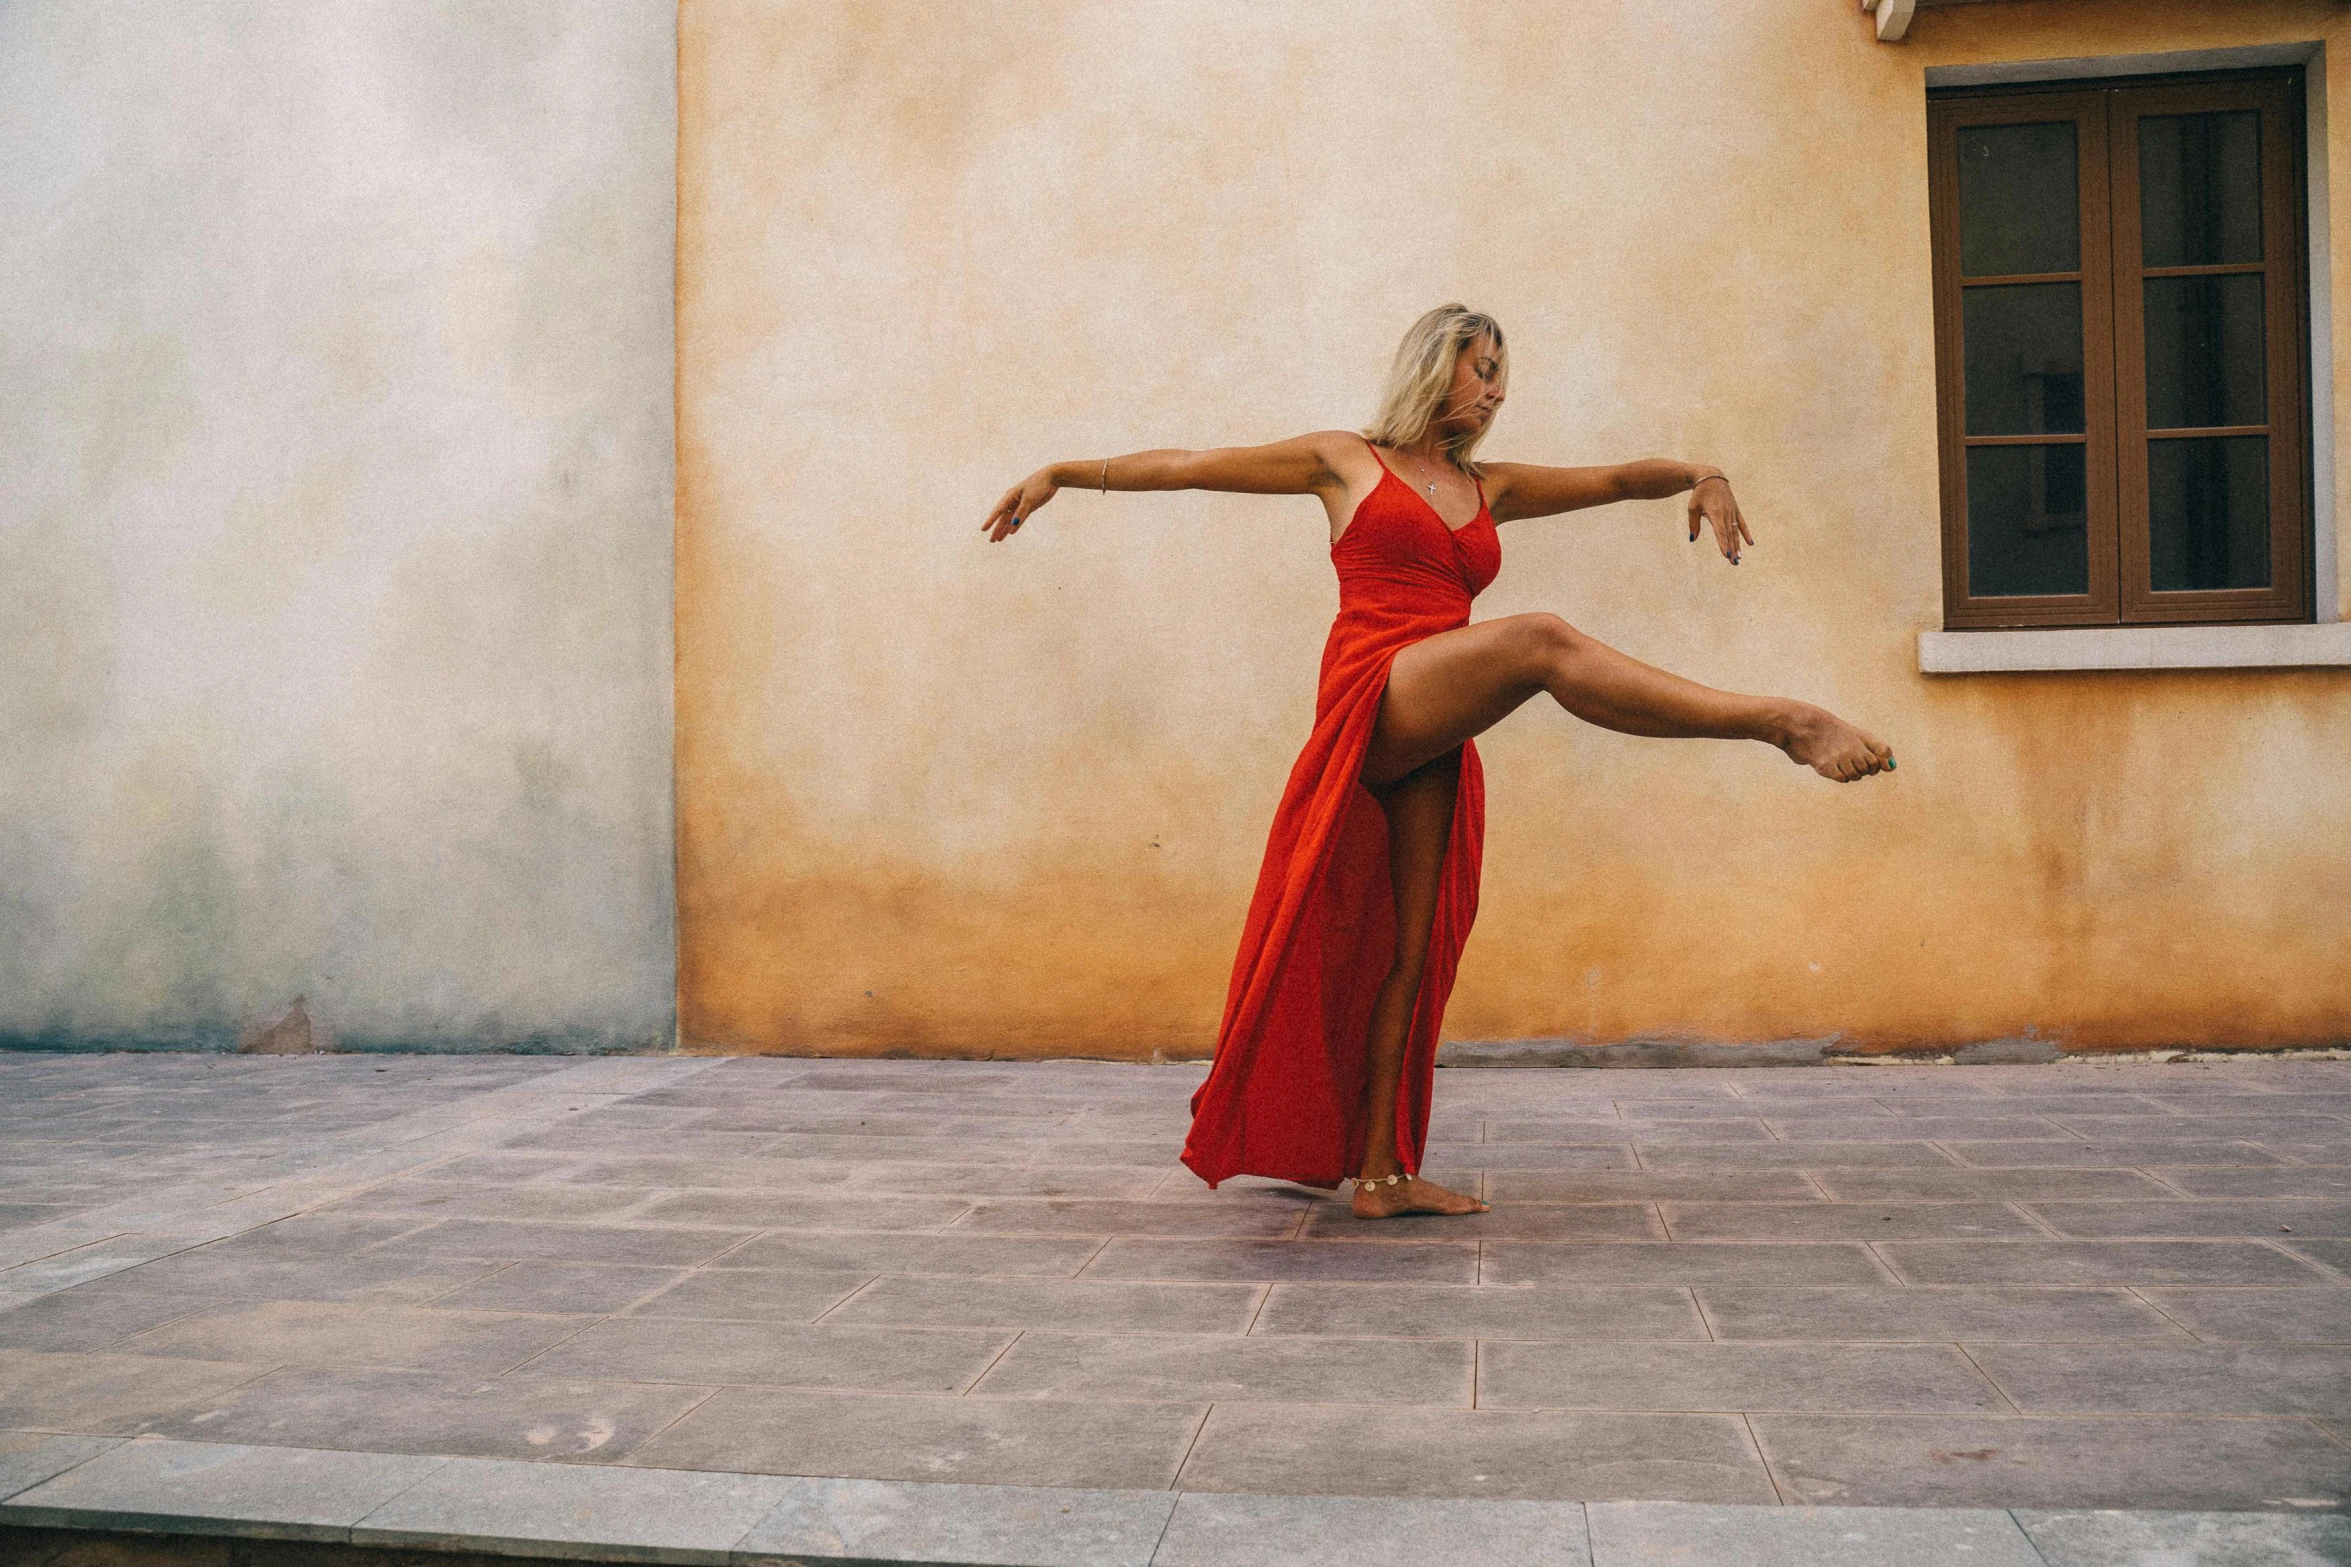 a woman dancing on the ground wearing a red dress